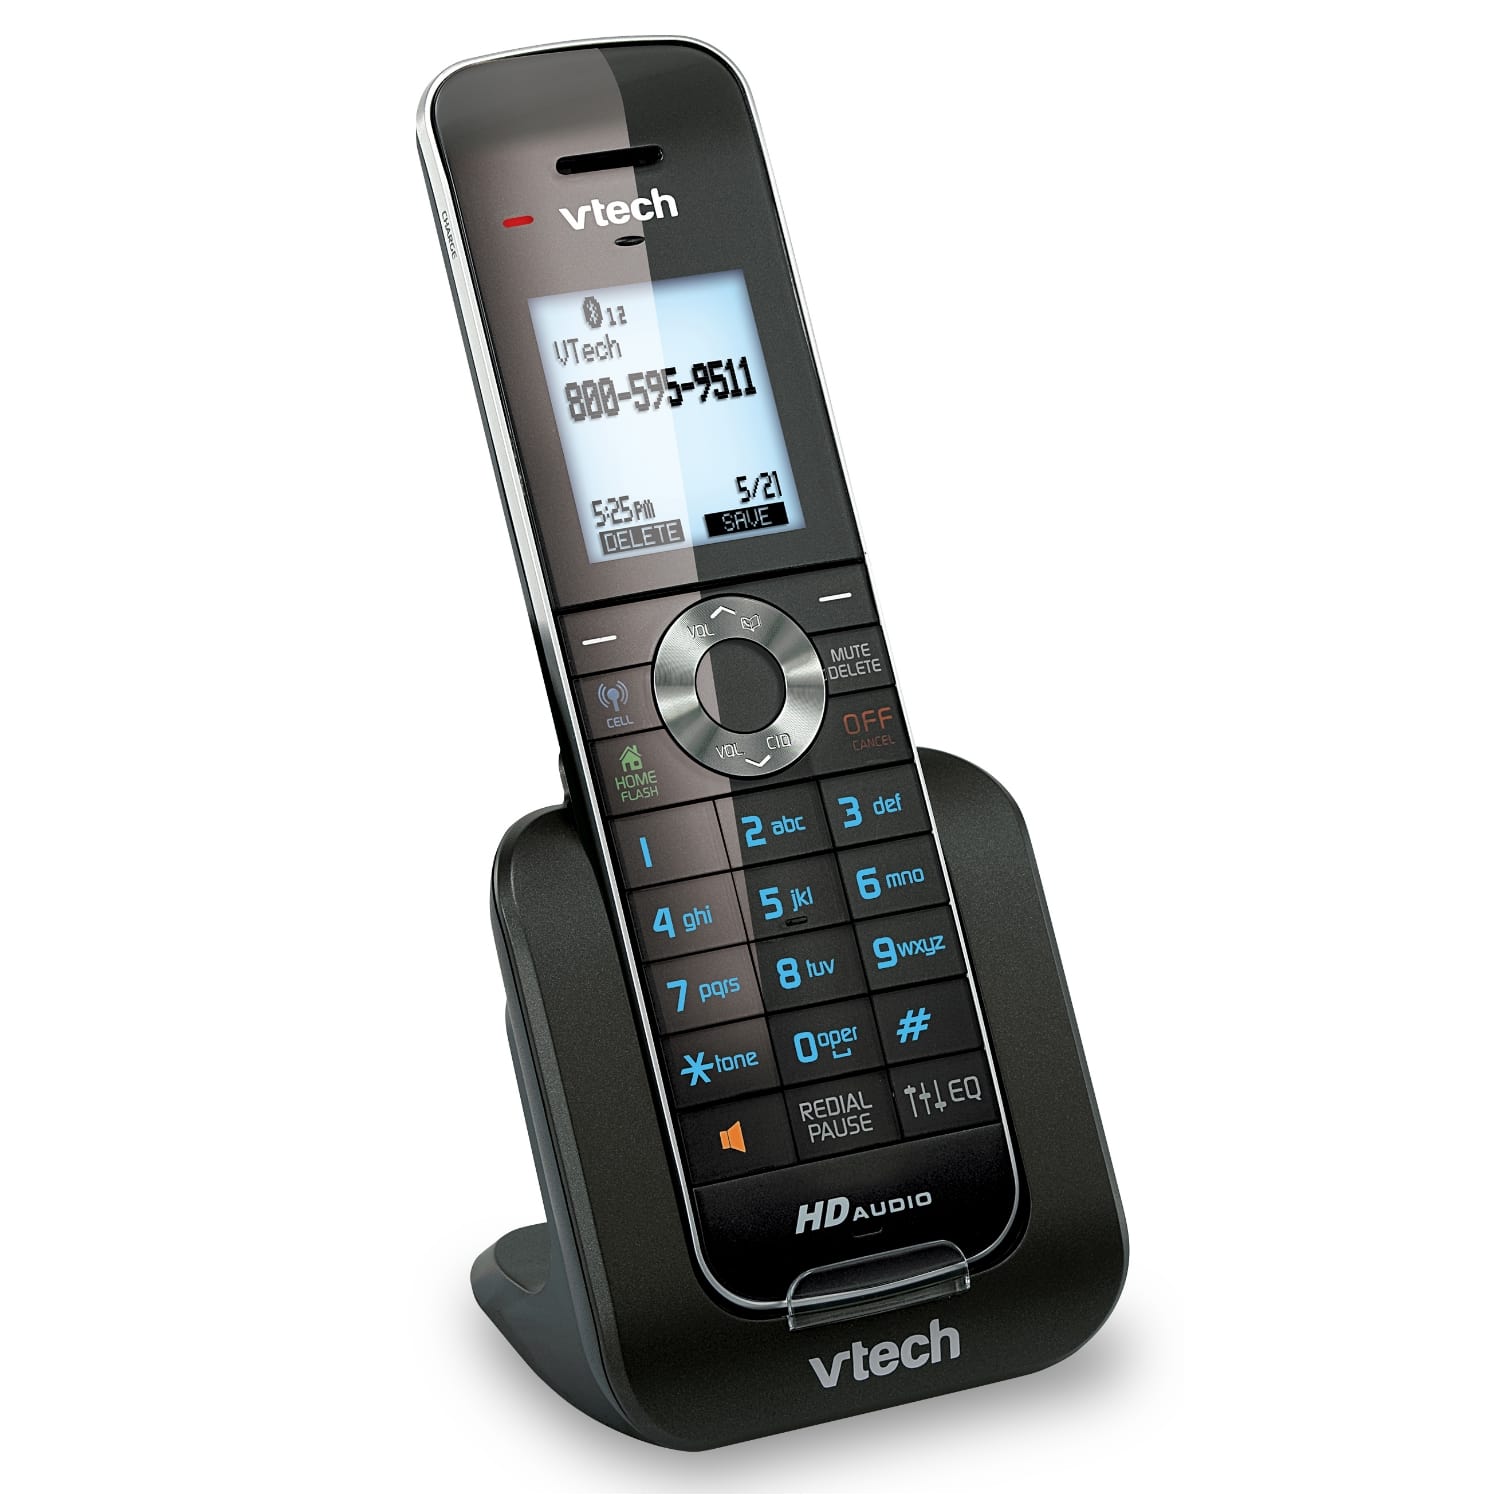 4 Handset Connect to Cell™ Phone System with Cordless Headset